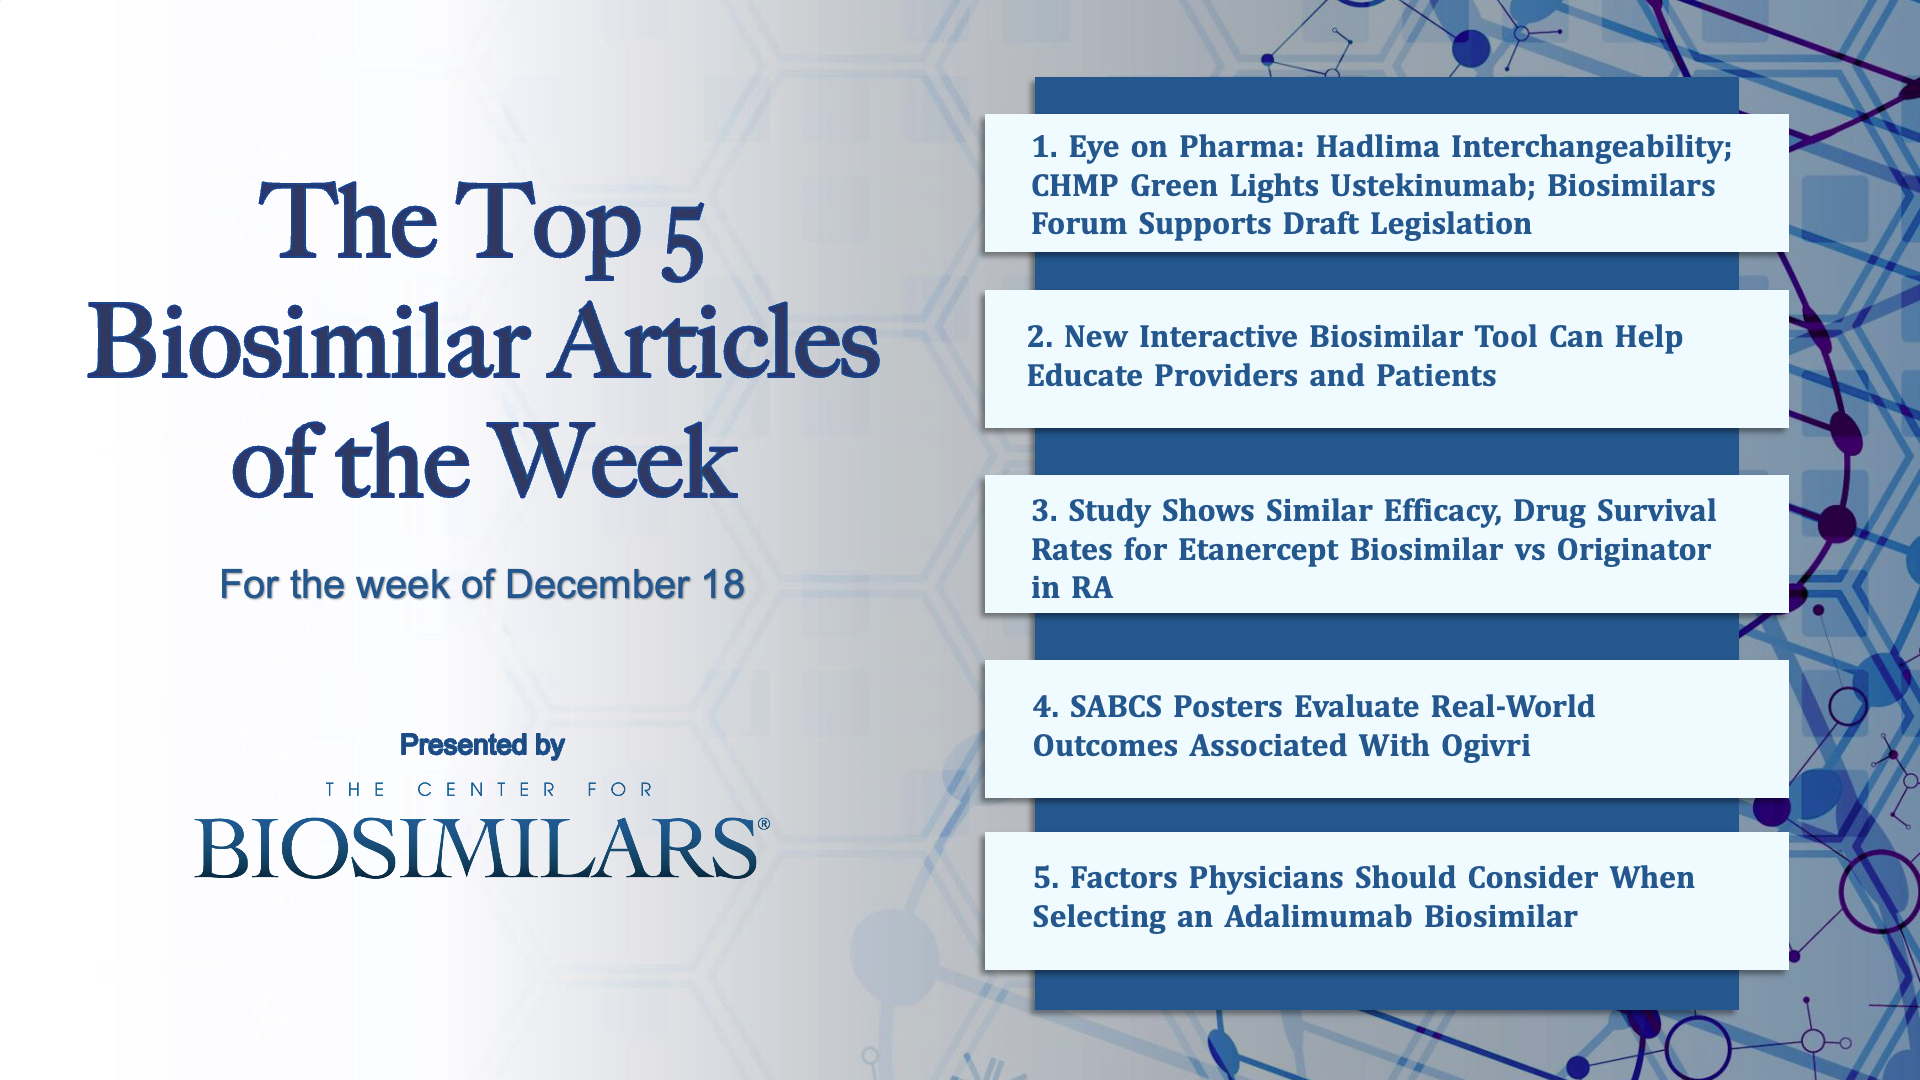 The Top 5 Biosimilar Articles for the Week of December 18